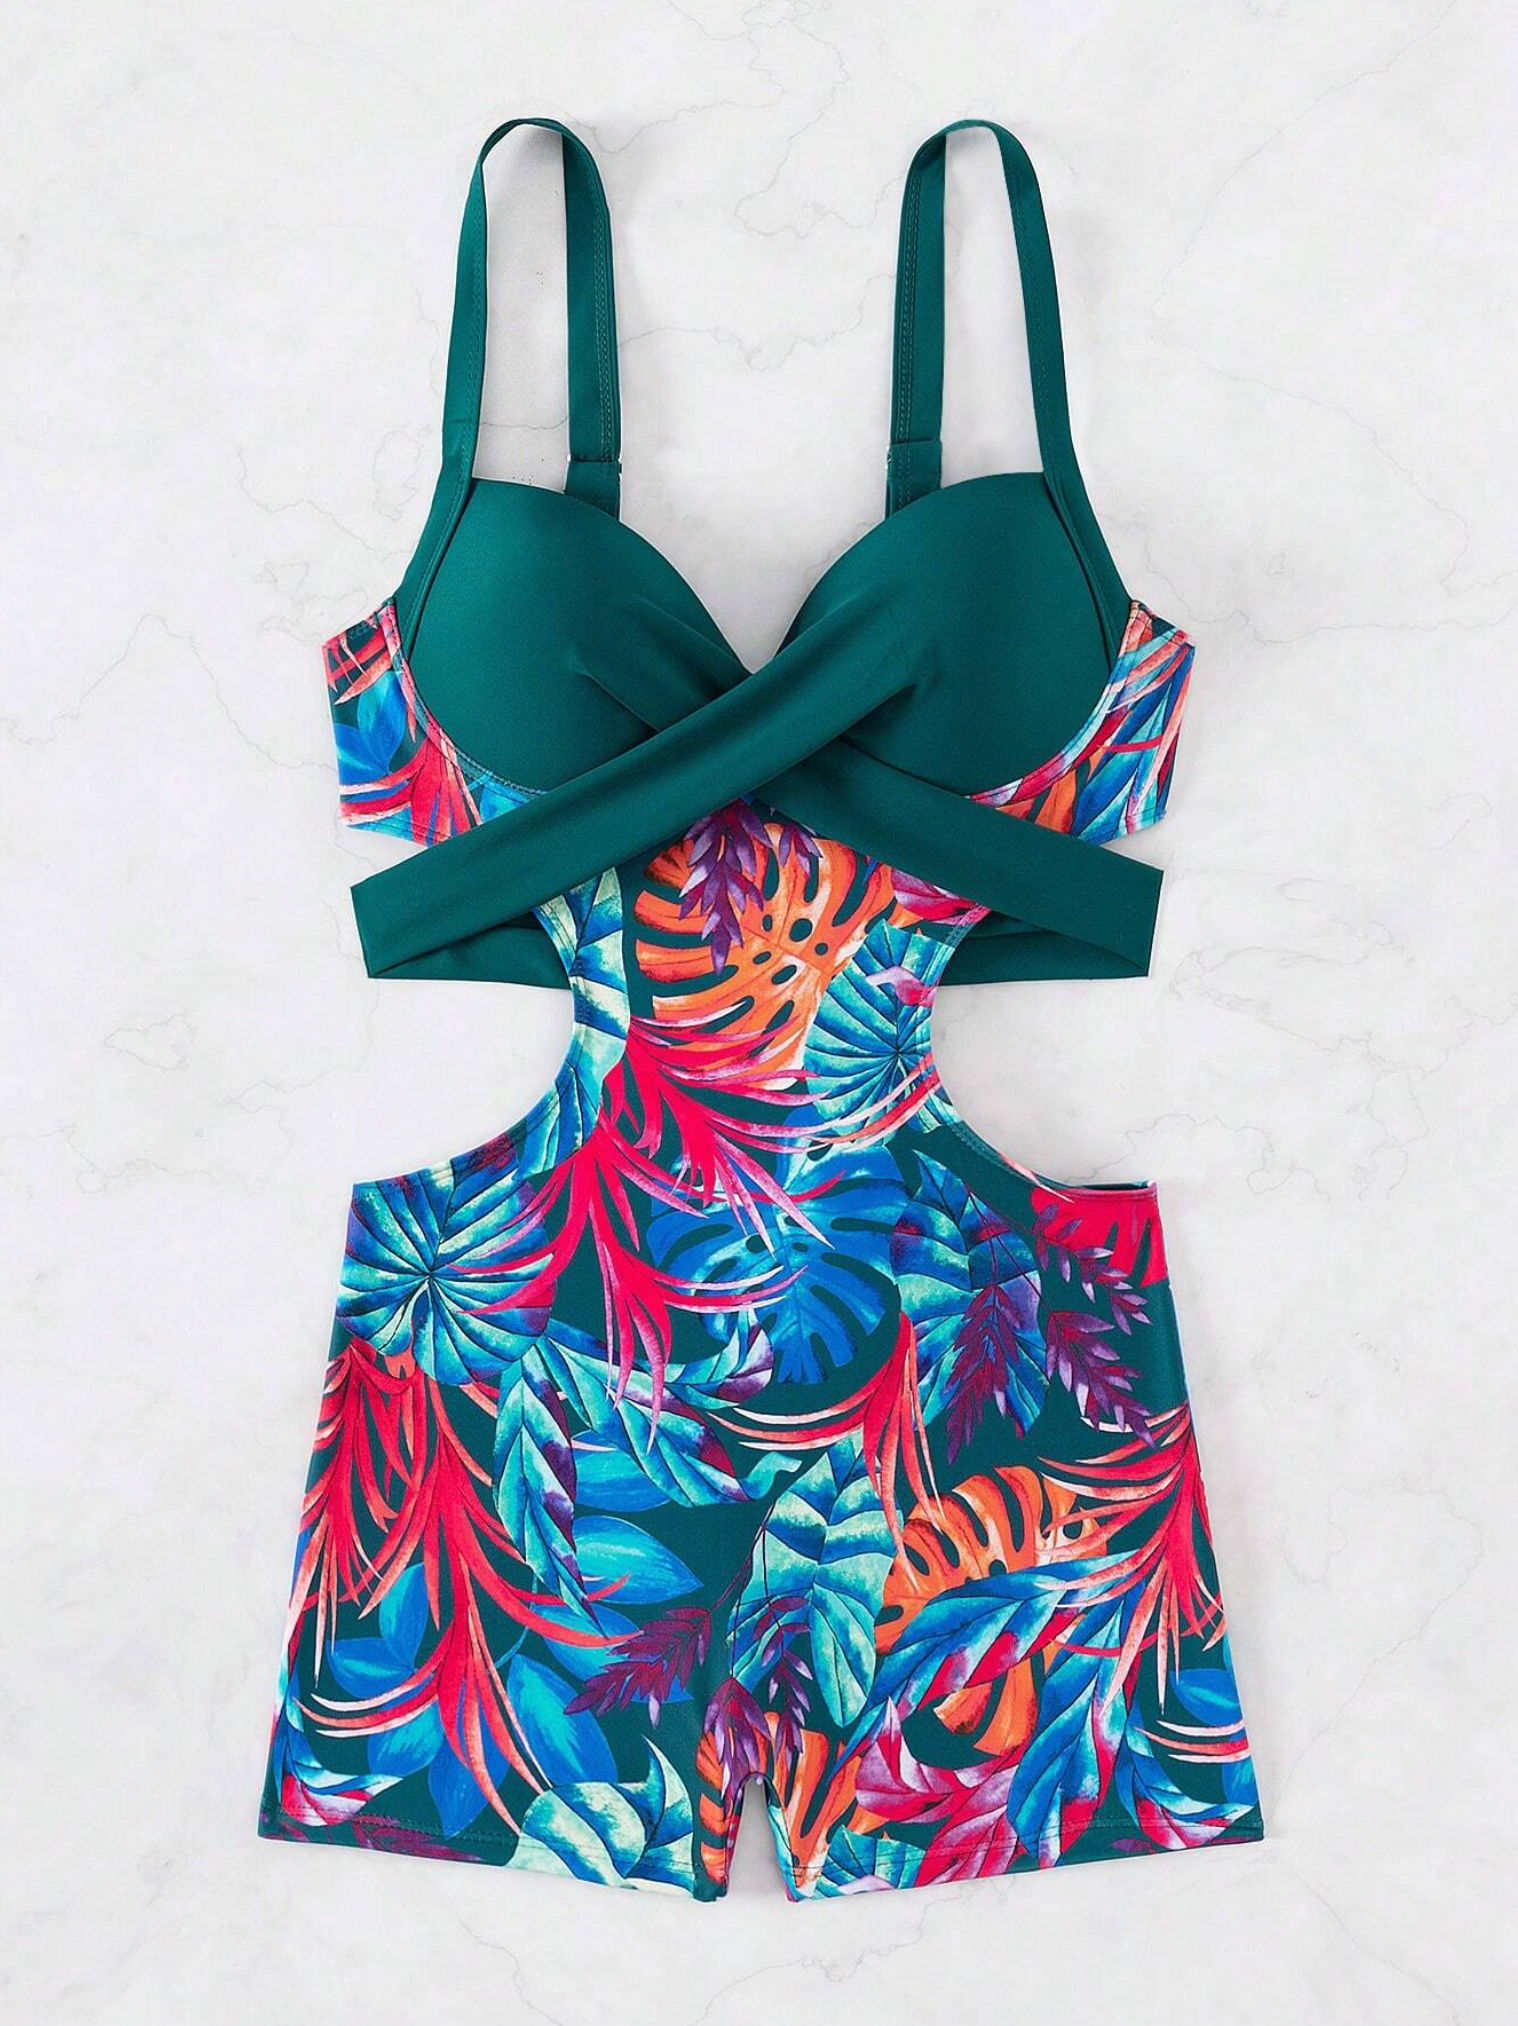 Teal & Tropical Cut Out Push Up One Piece Shorts